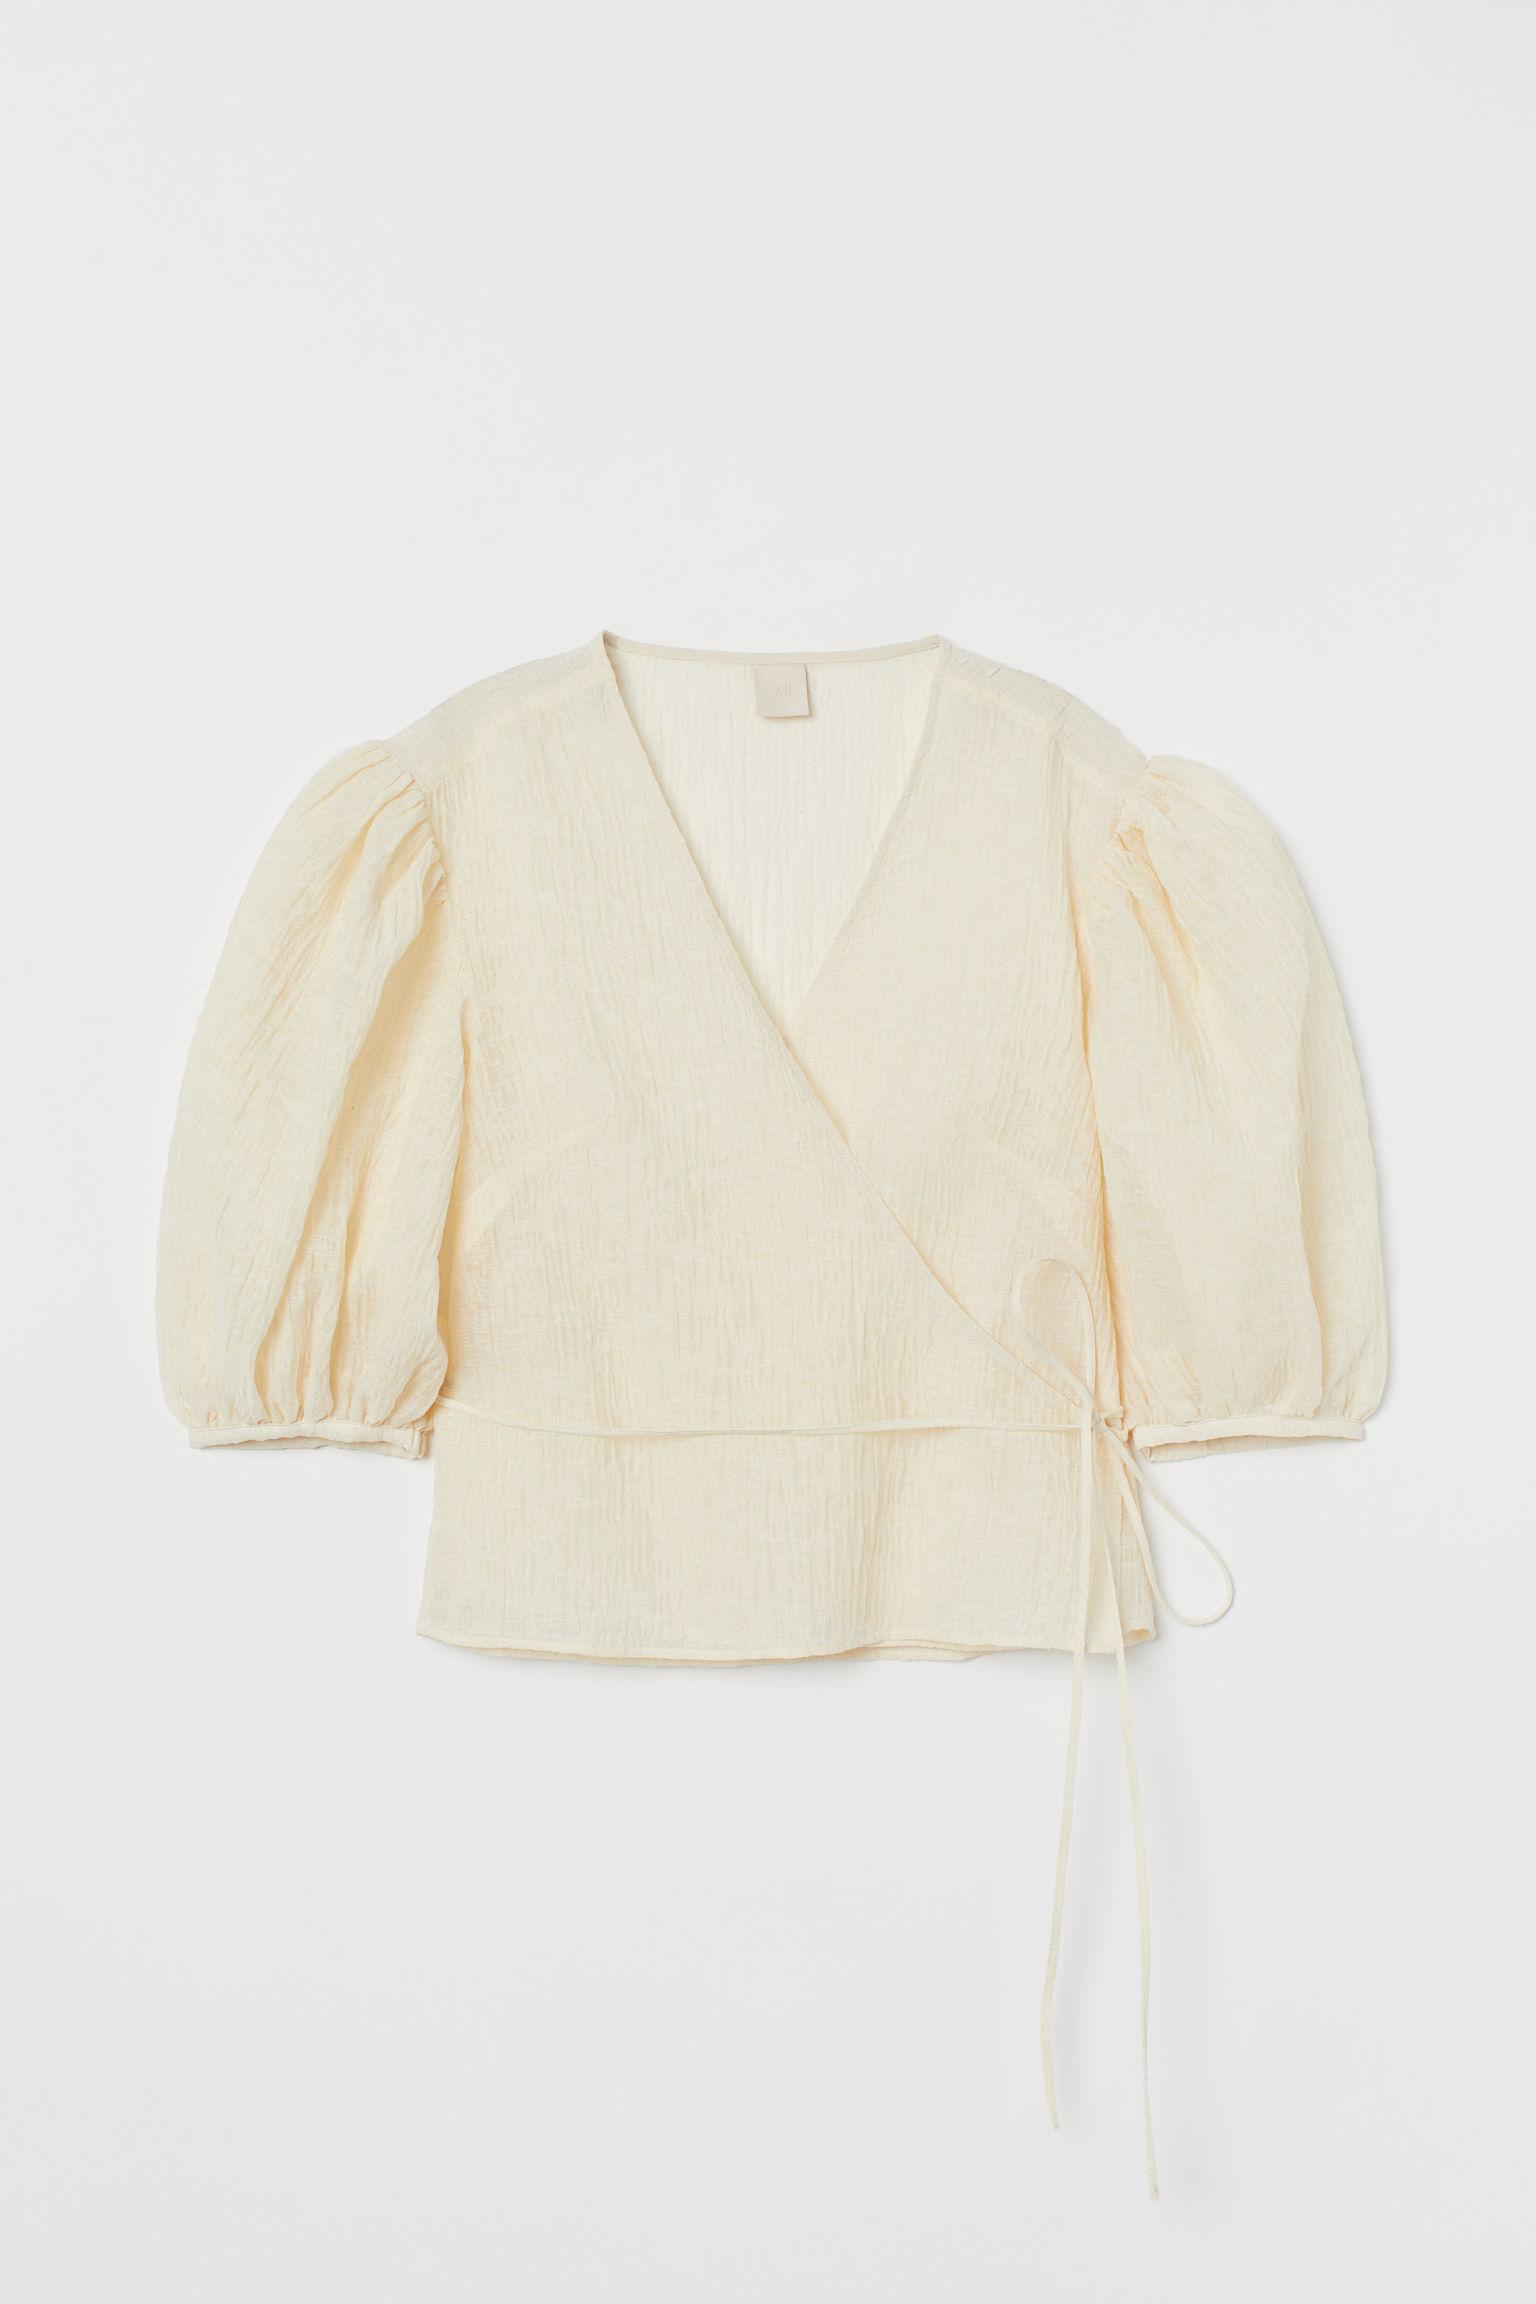 H&M Crinkled Wrapover Blouse in White - Lyst